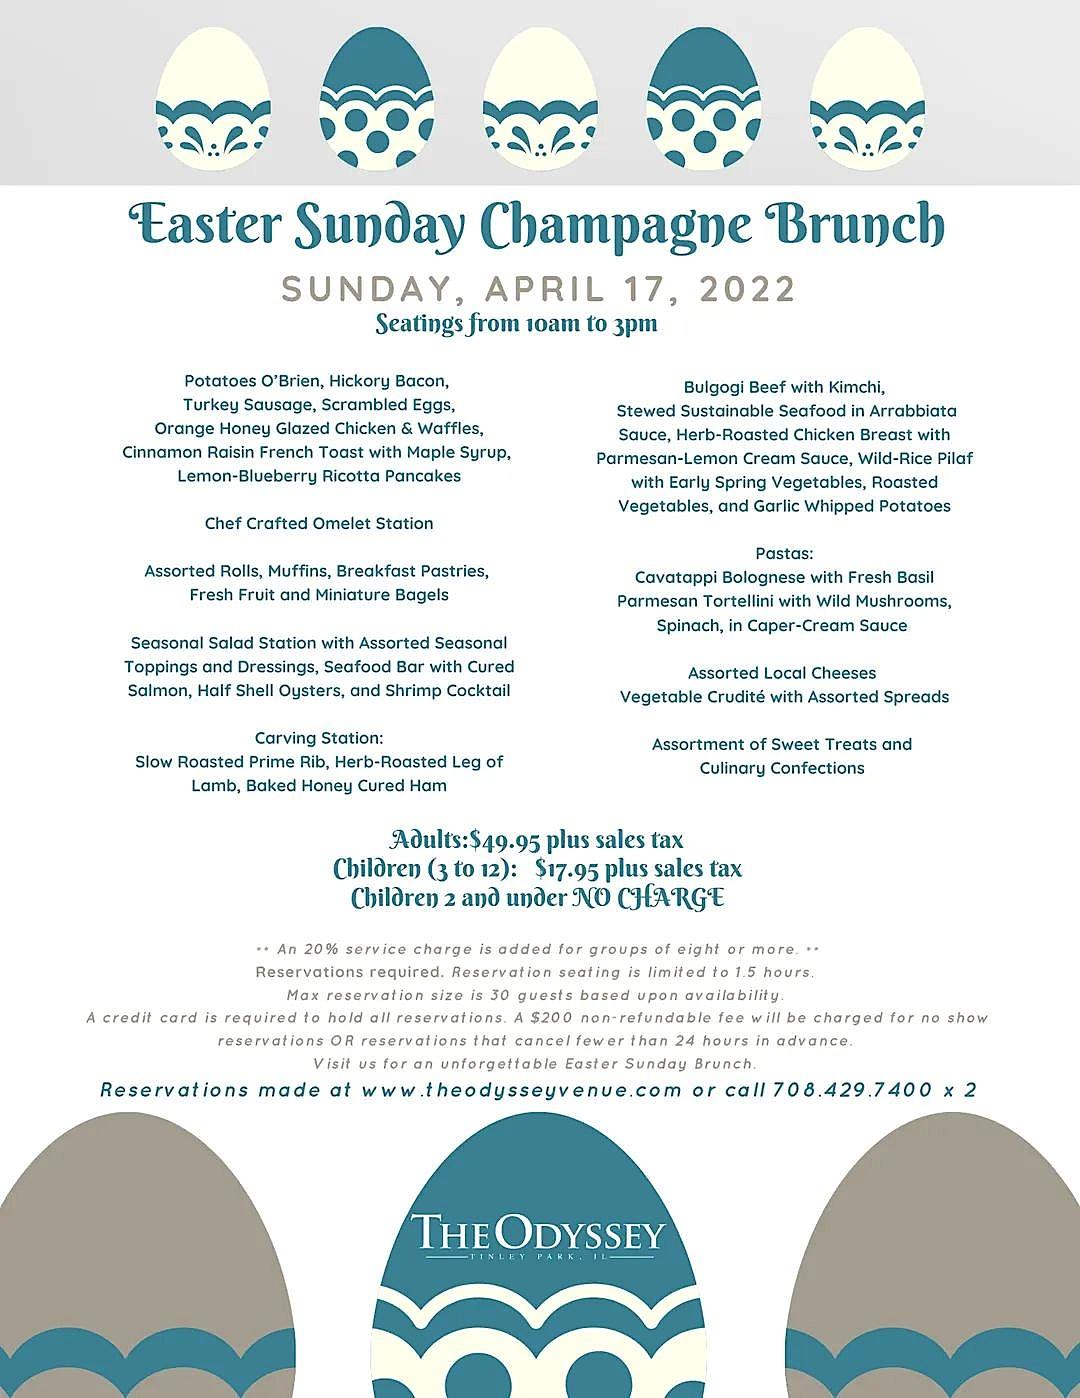 Easter Sunday Champagne Brunch at The Odyssey Banquet Venue Tinley